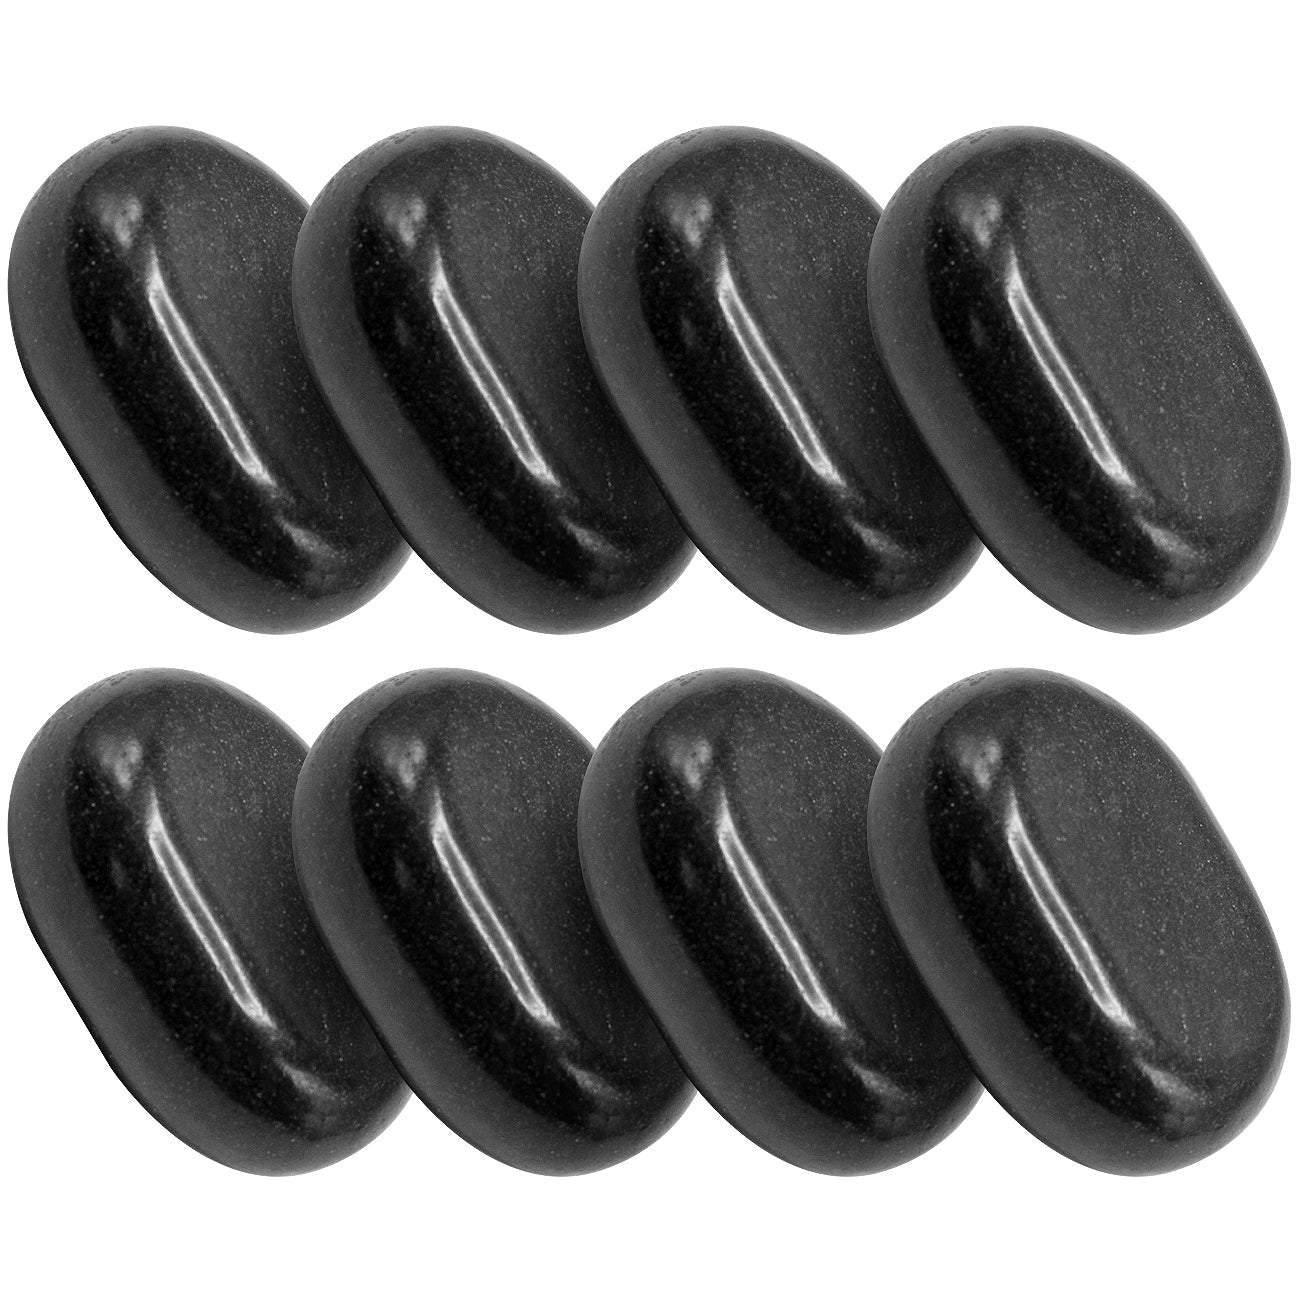 Sivan Health and Fitness Black Basalt Stone Set for Spas, Massage Therapy and more